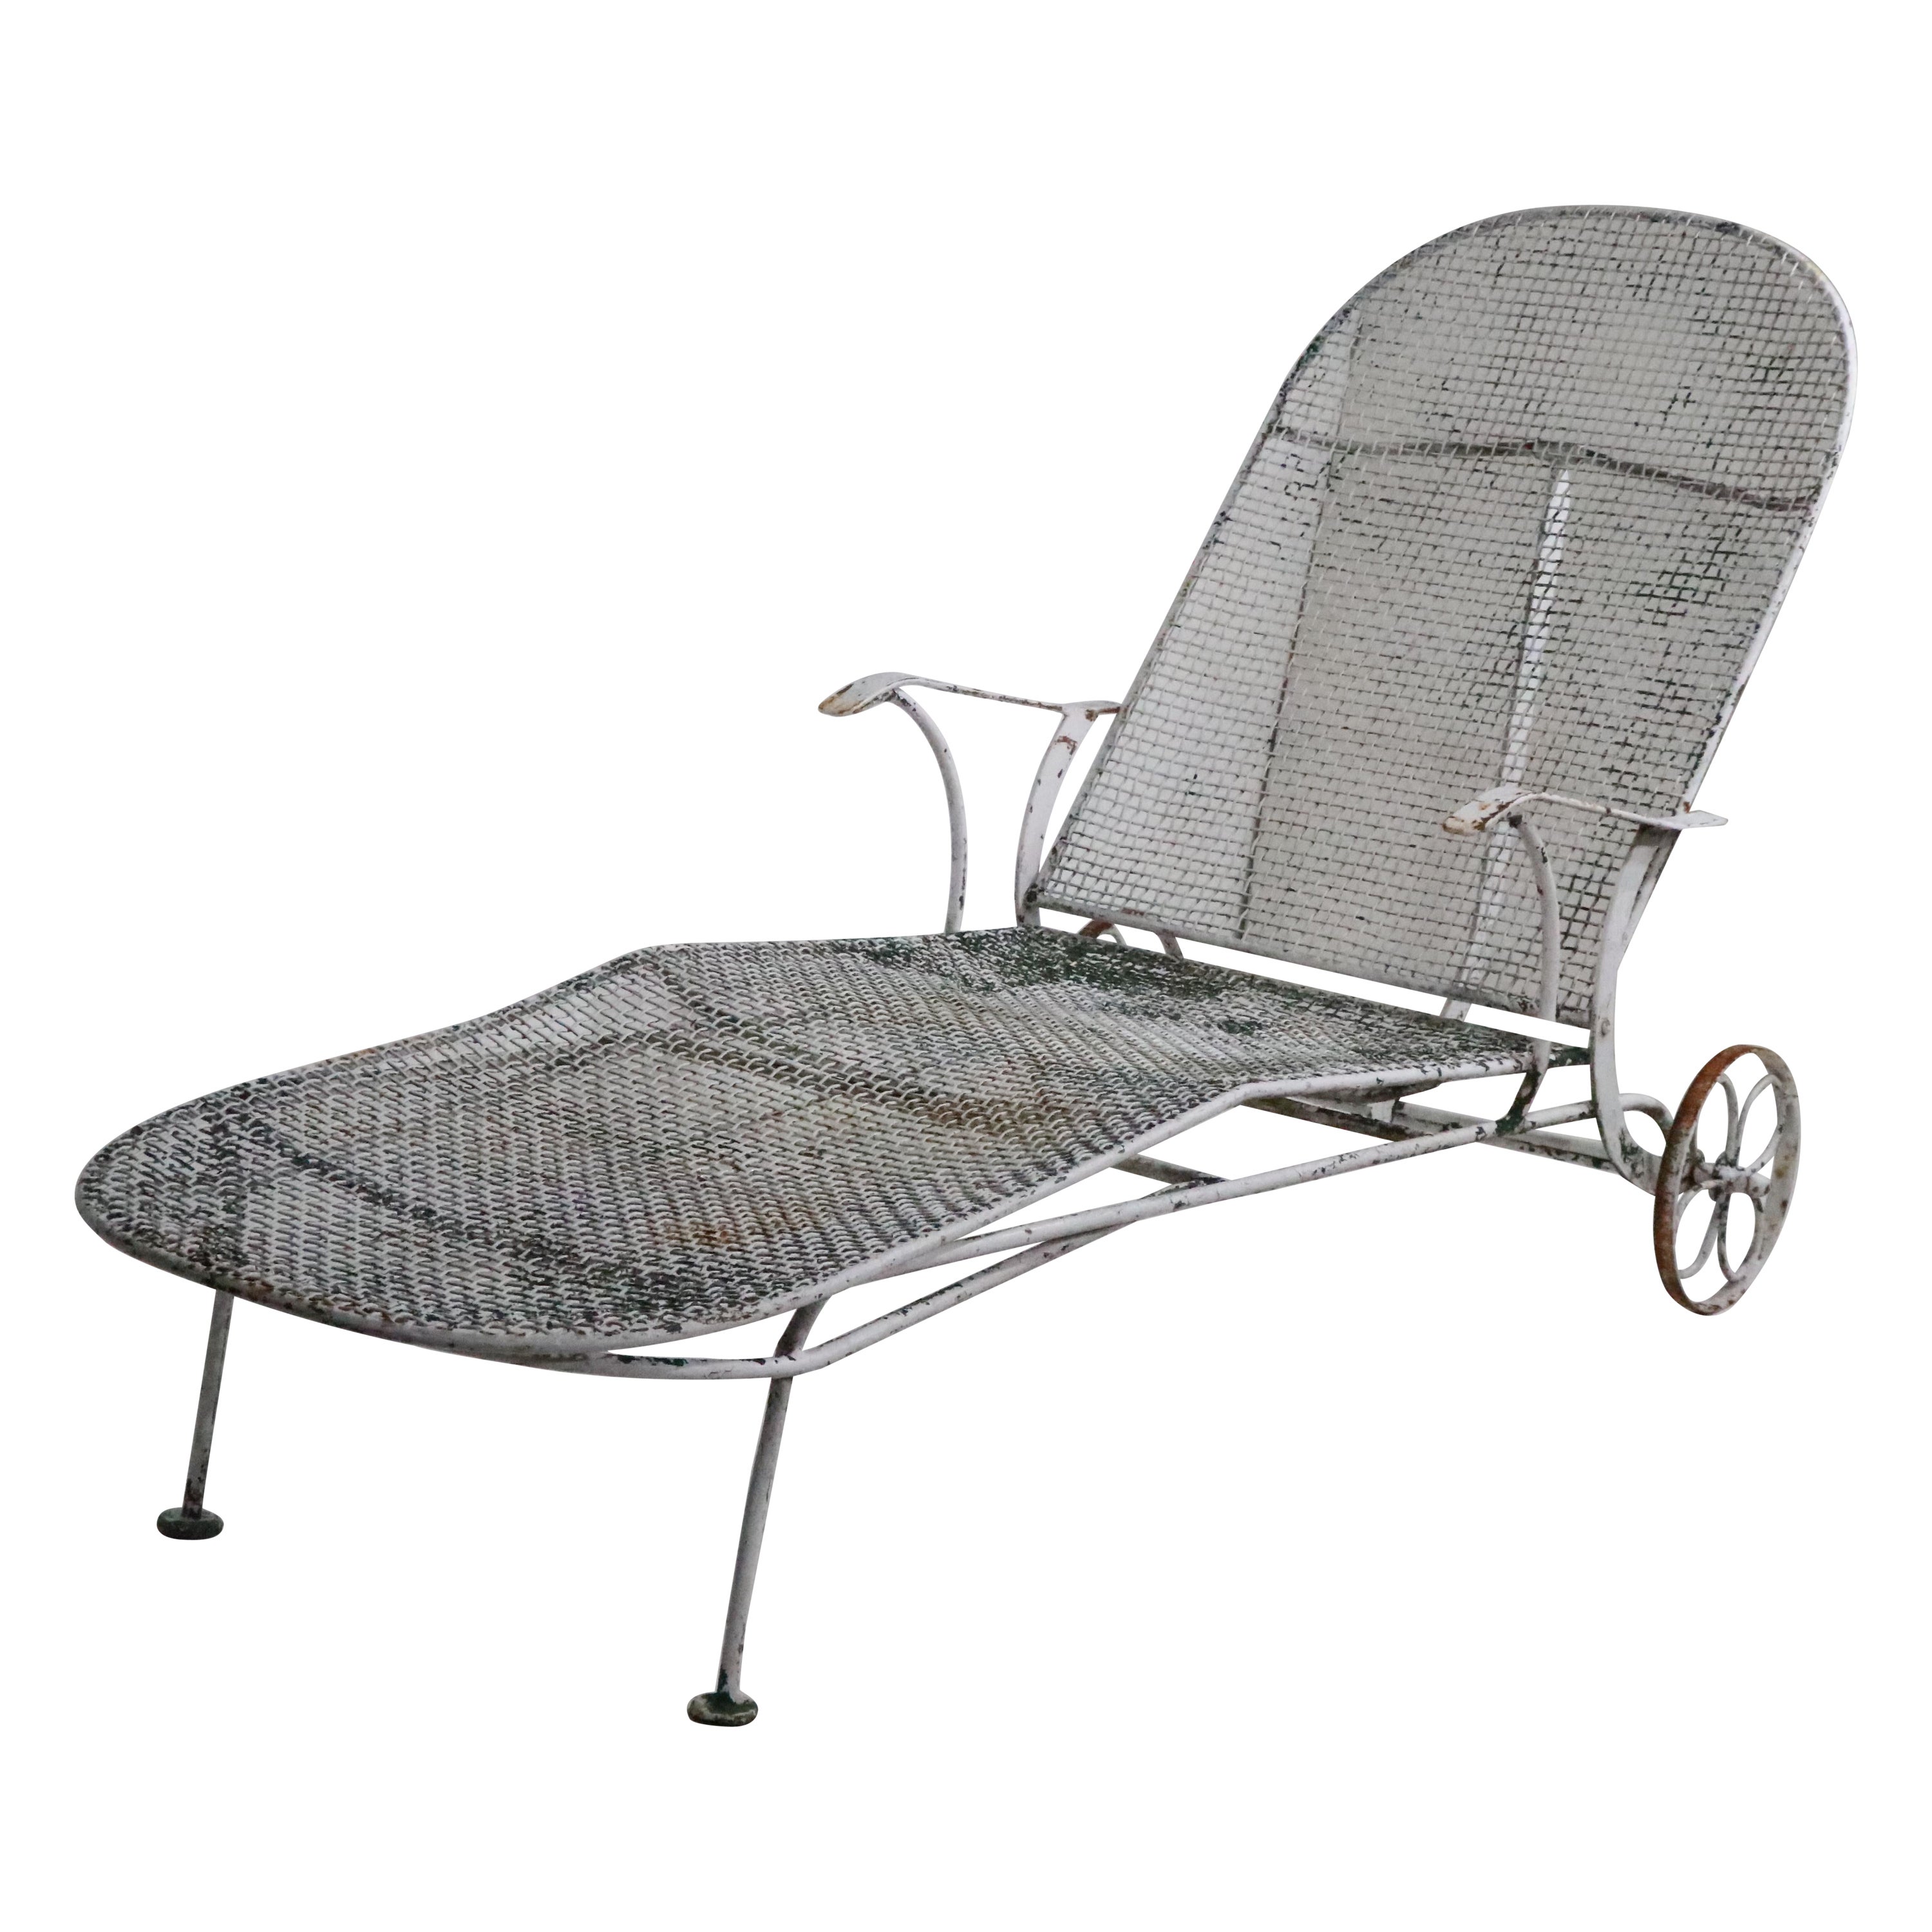  Wrought Iron Garden Poolside Patio Woodard Sculptura Chaise Lounge c. 1950's For Sale